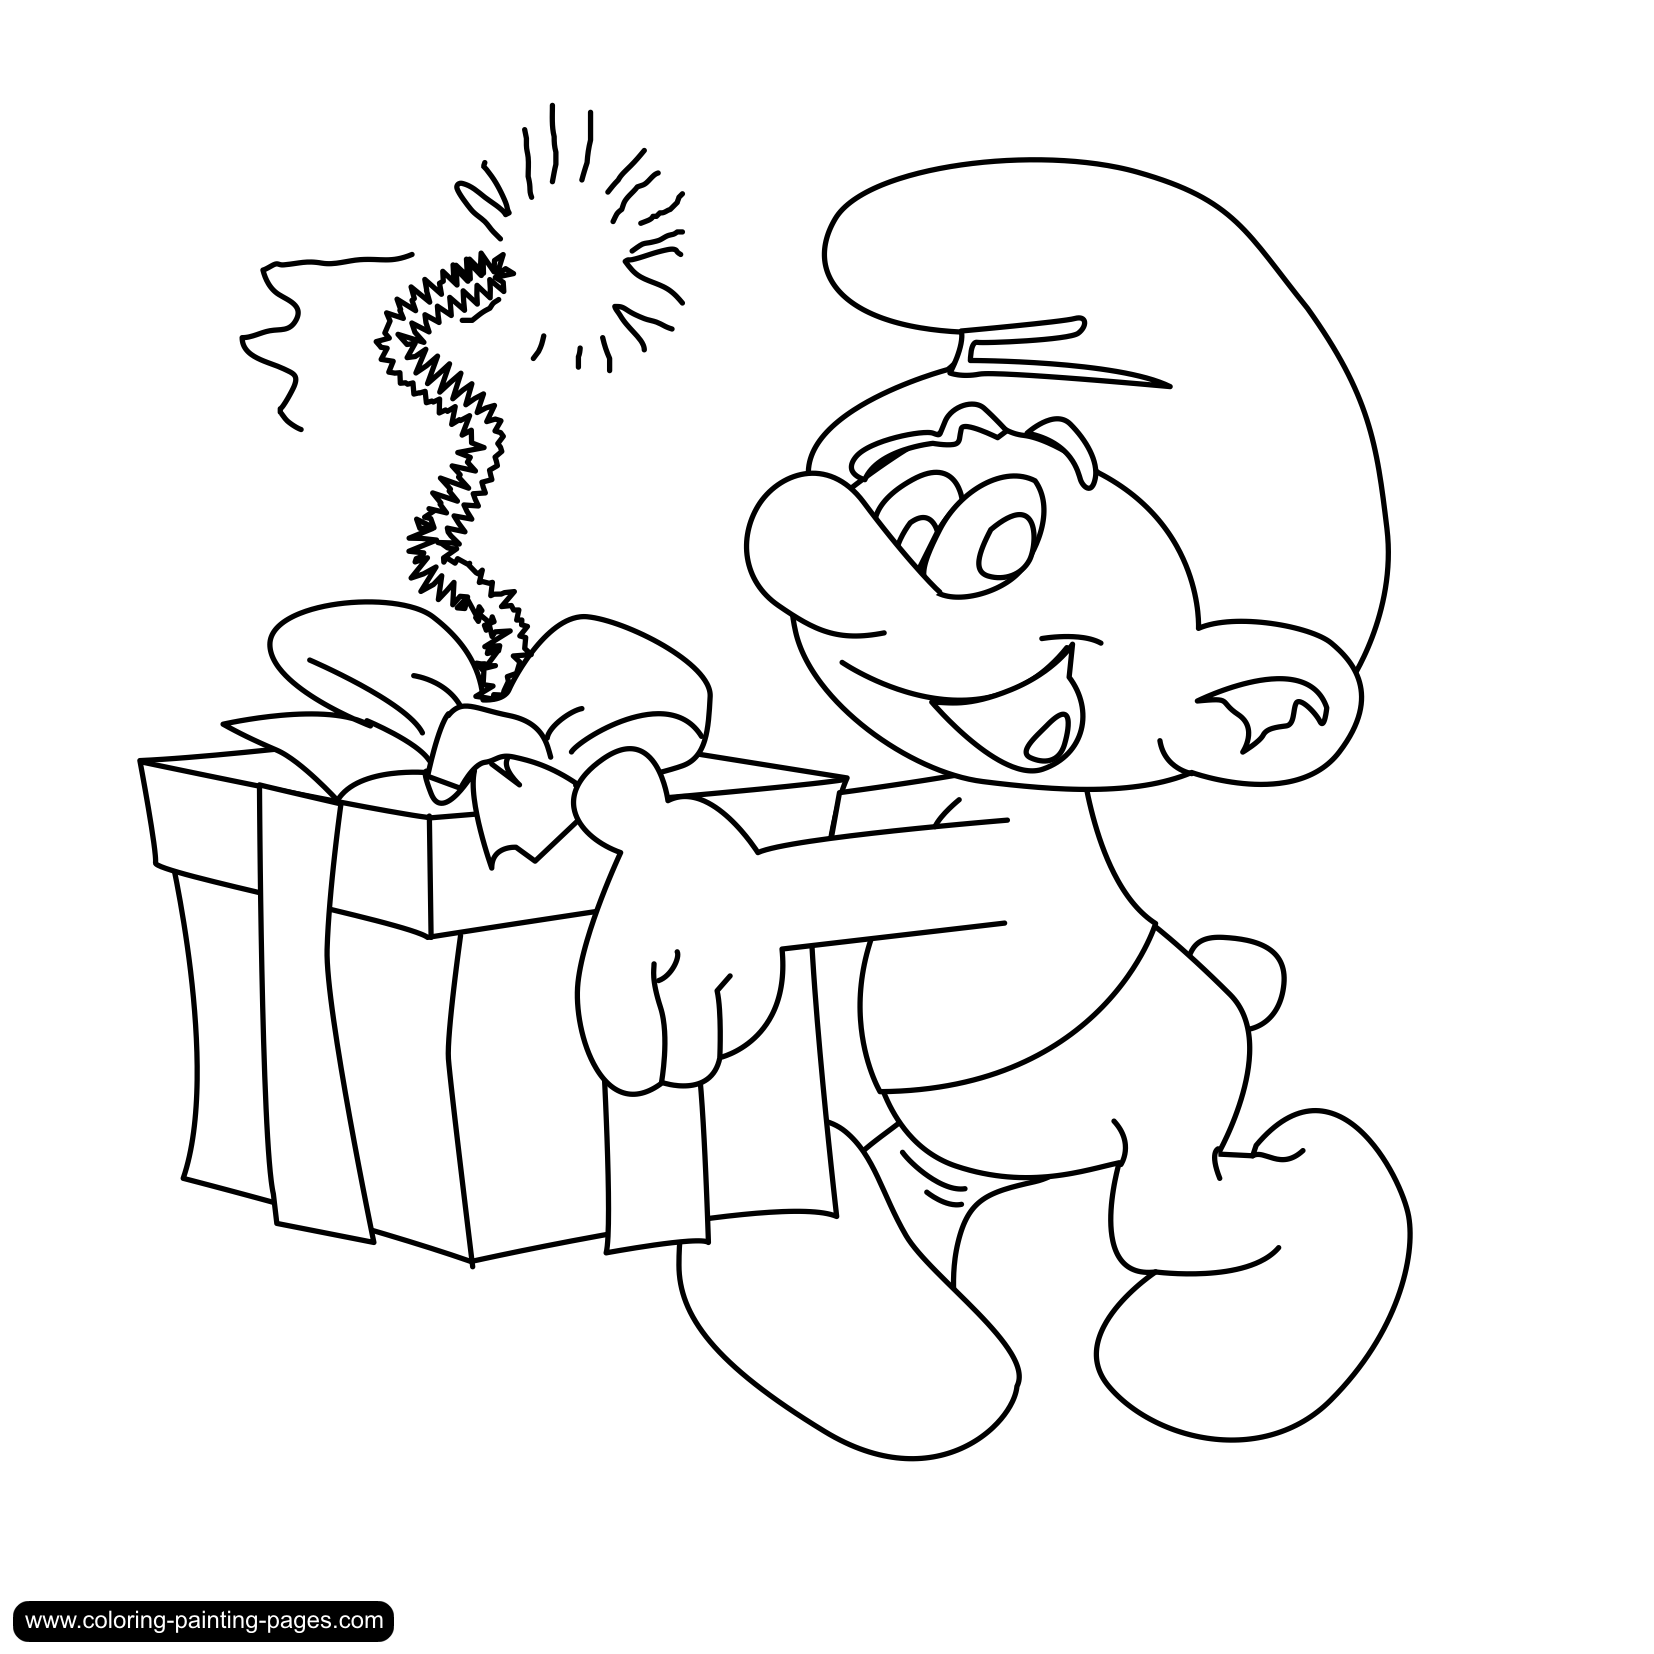 Best Photos of Smurf Christmas Coloring Pages - Smurfs 2 Coloring ...